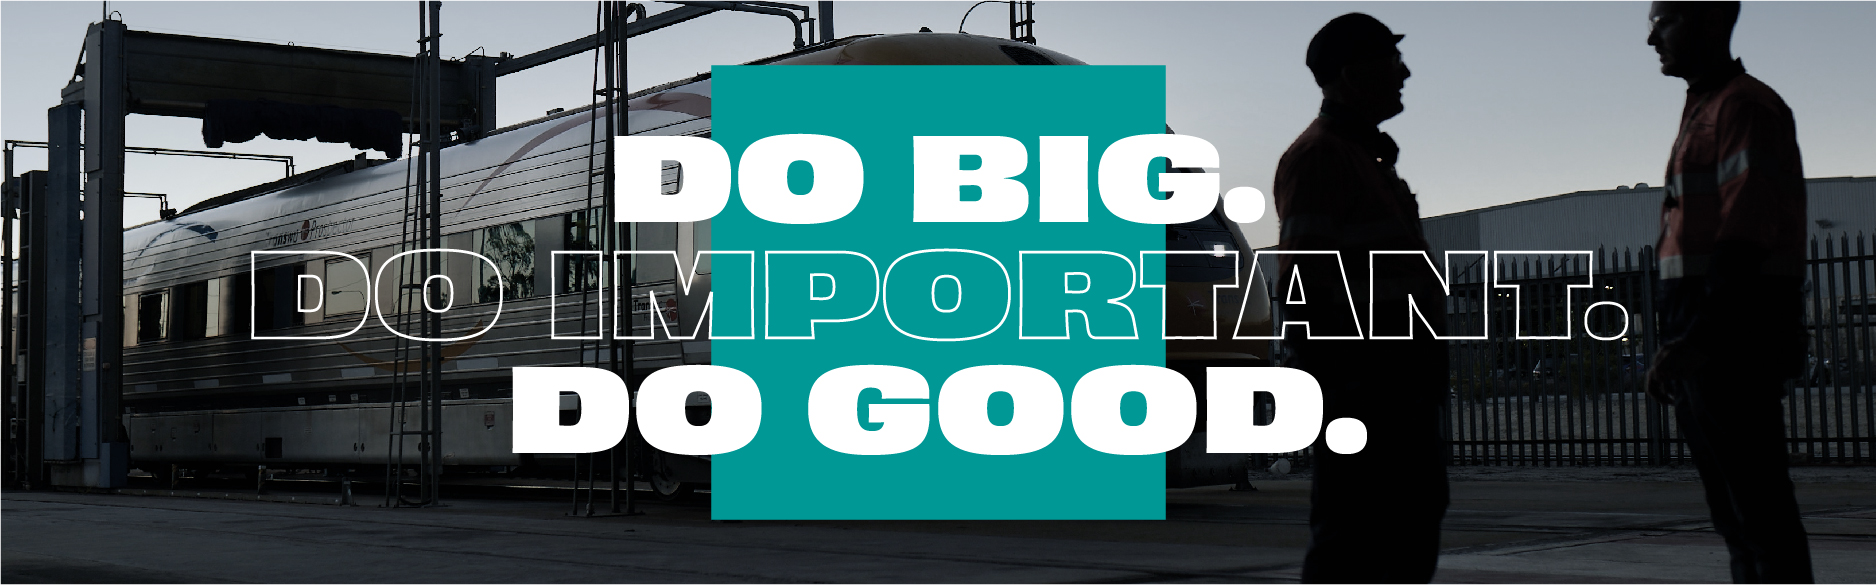 Transperth train at the Claisebrook depot with the slogan Do Big, Do Important, Do Good